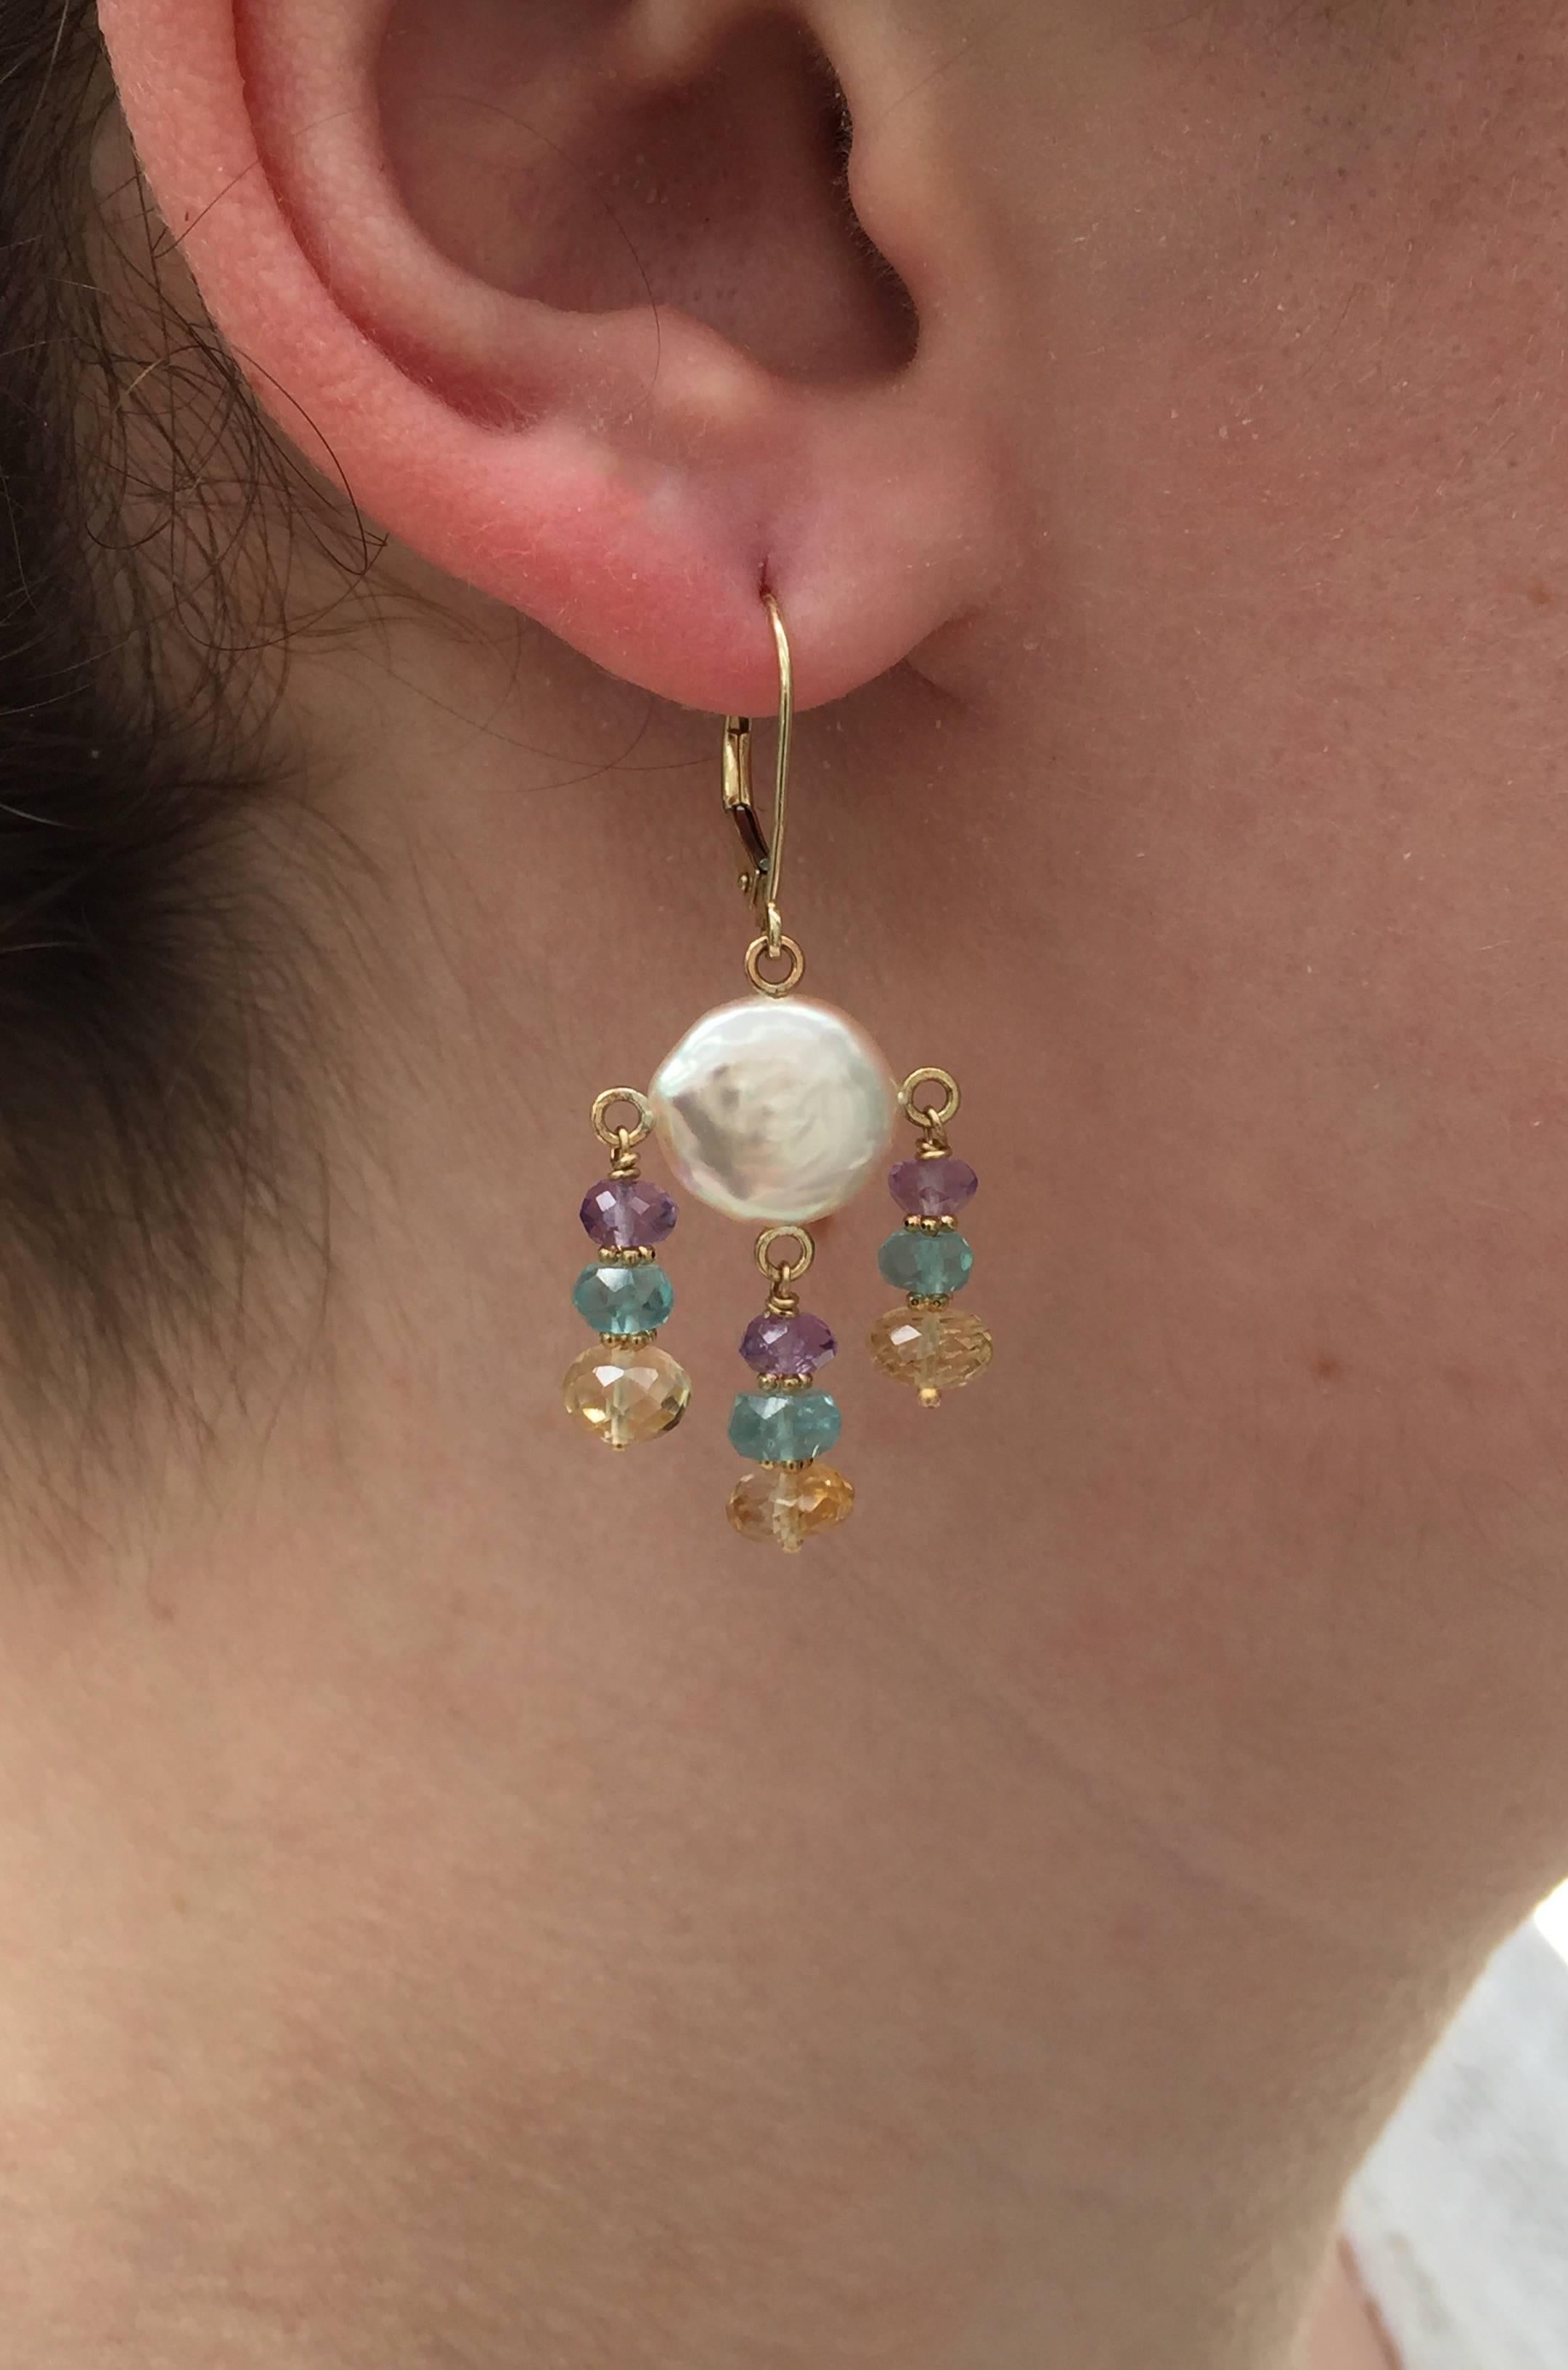 White Pearl Earrings with Amethyst, Topaz, Citrine and 14 Karat Gold by Marina J For Sale 1